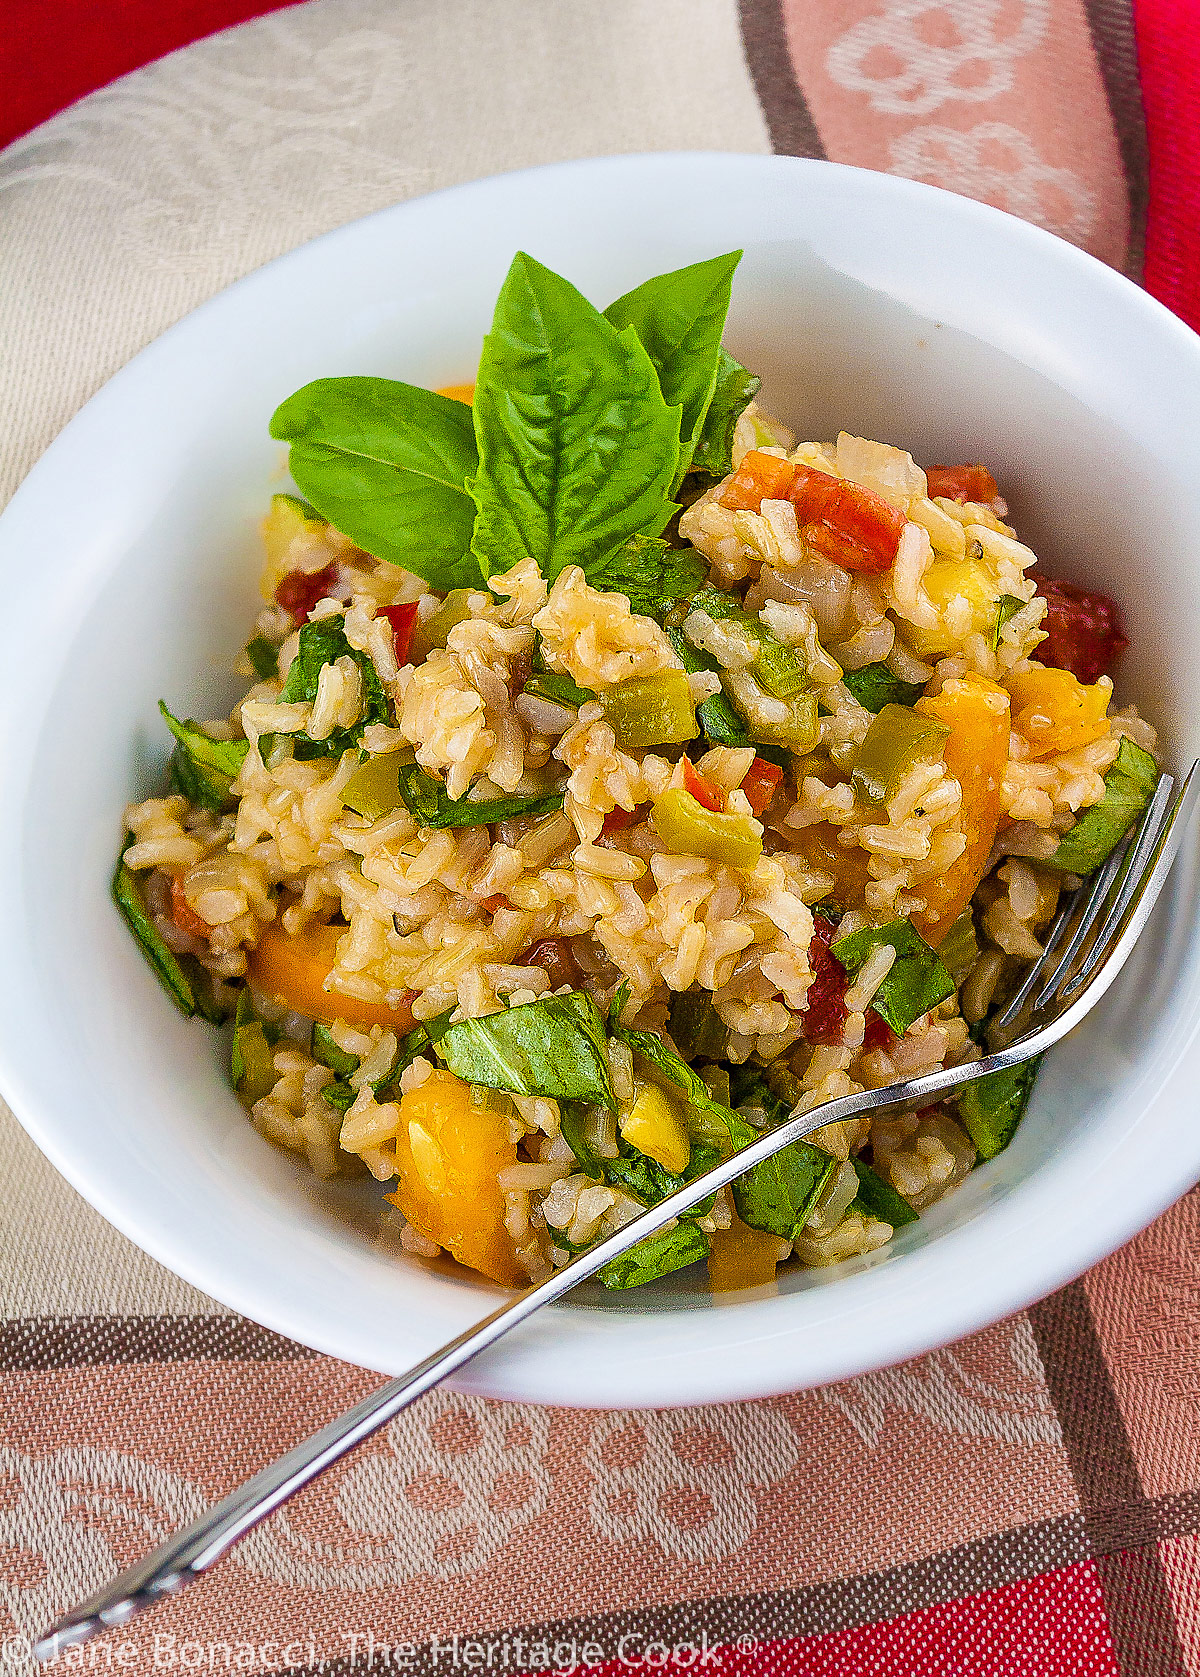 White bowl filled with cooked brown rice tossed with varied vegetables, vinaigrette, and basil leaves; Vegetable Brown Rice Salad © 2023 Jane Bonacci, The Heritage Cook. 